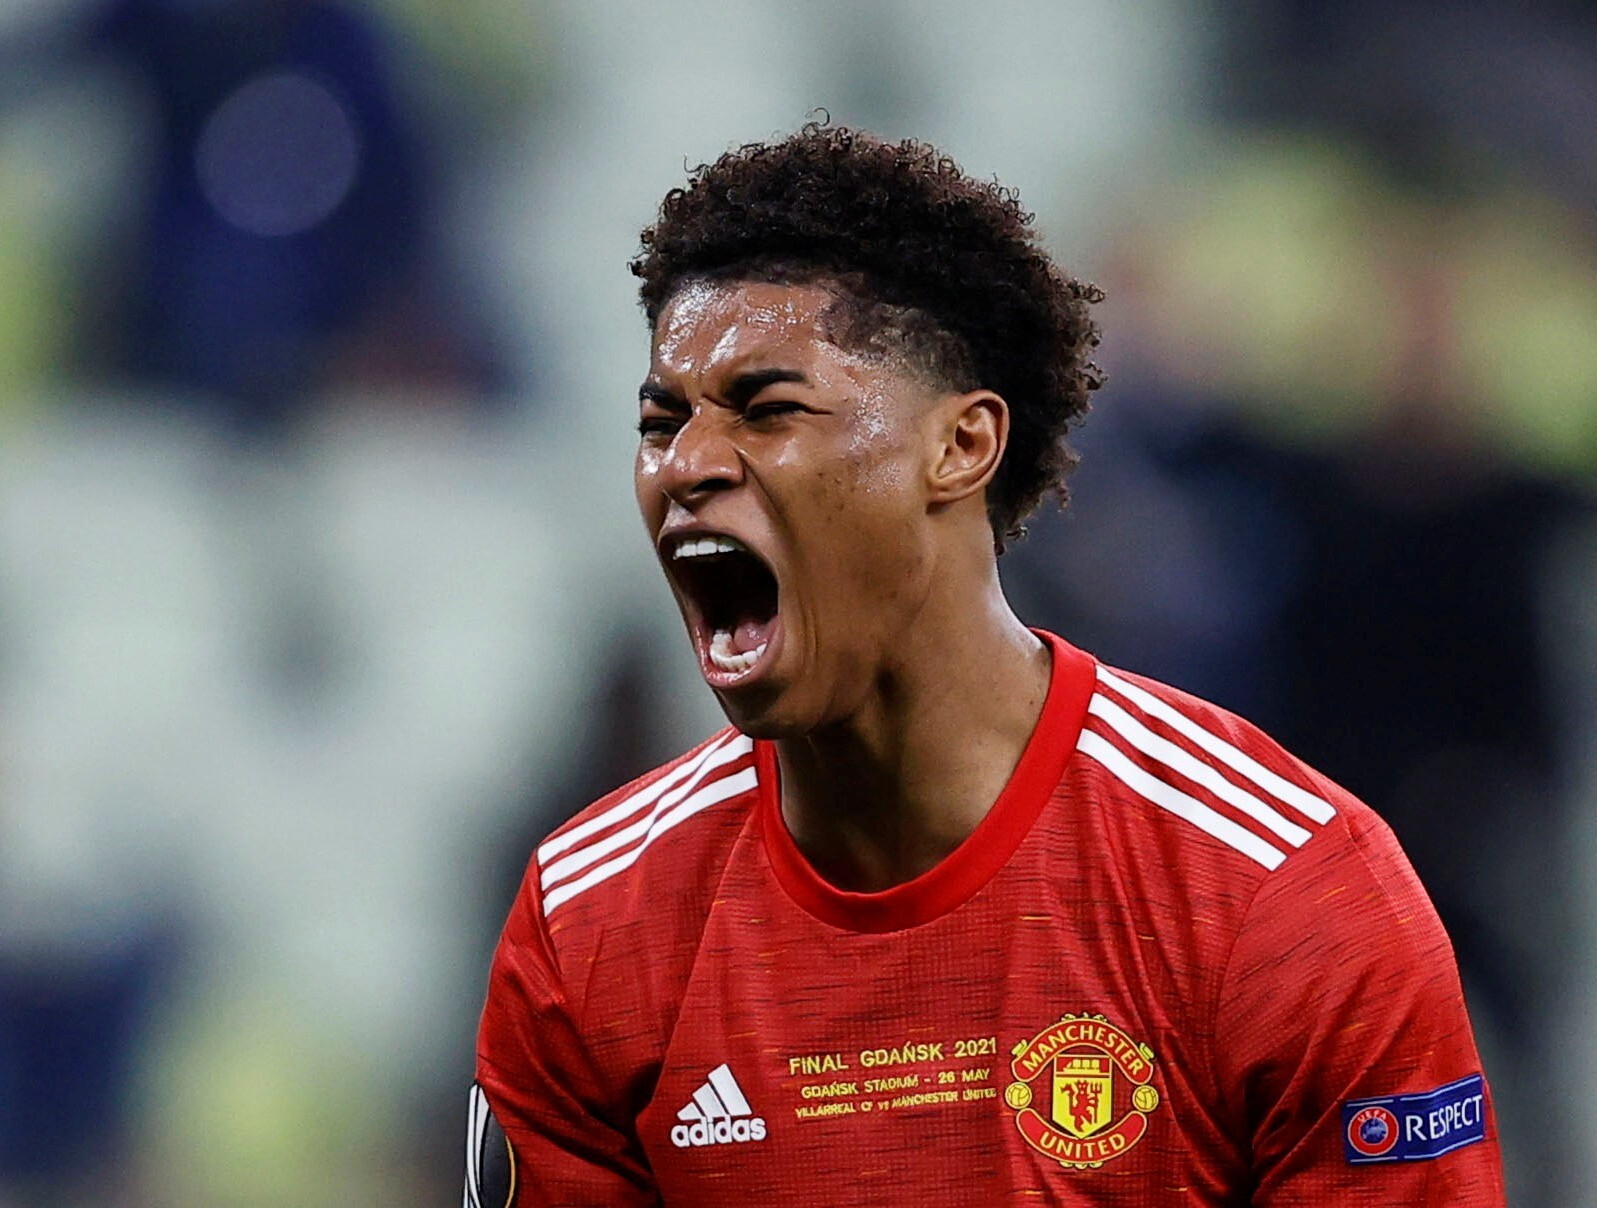 Manchester United’s Marcus Rashford was the subject of vile racist abuse following his team’s Europa League defeat. Photo: Reuters